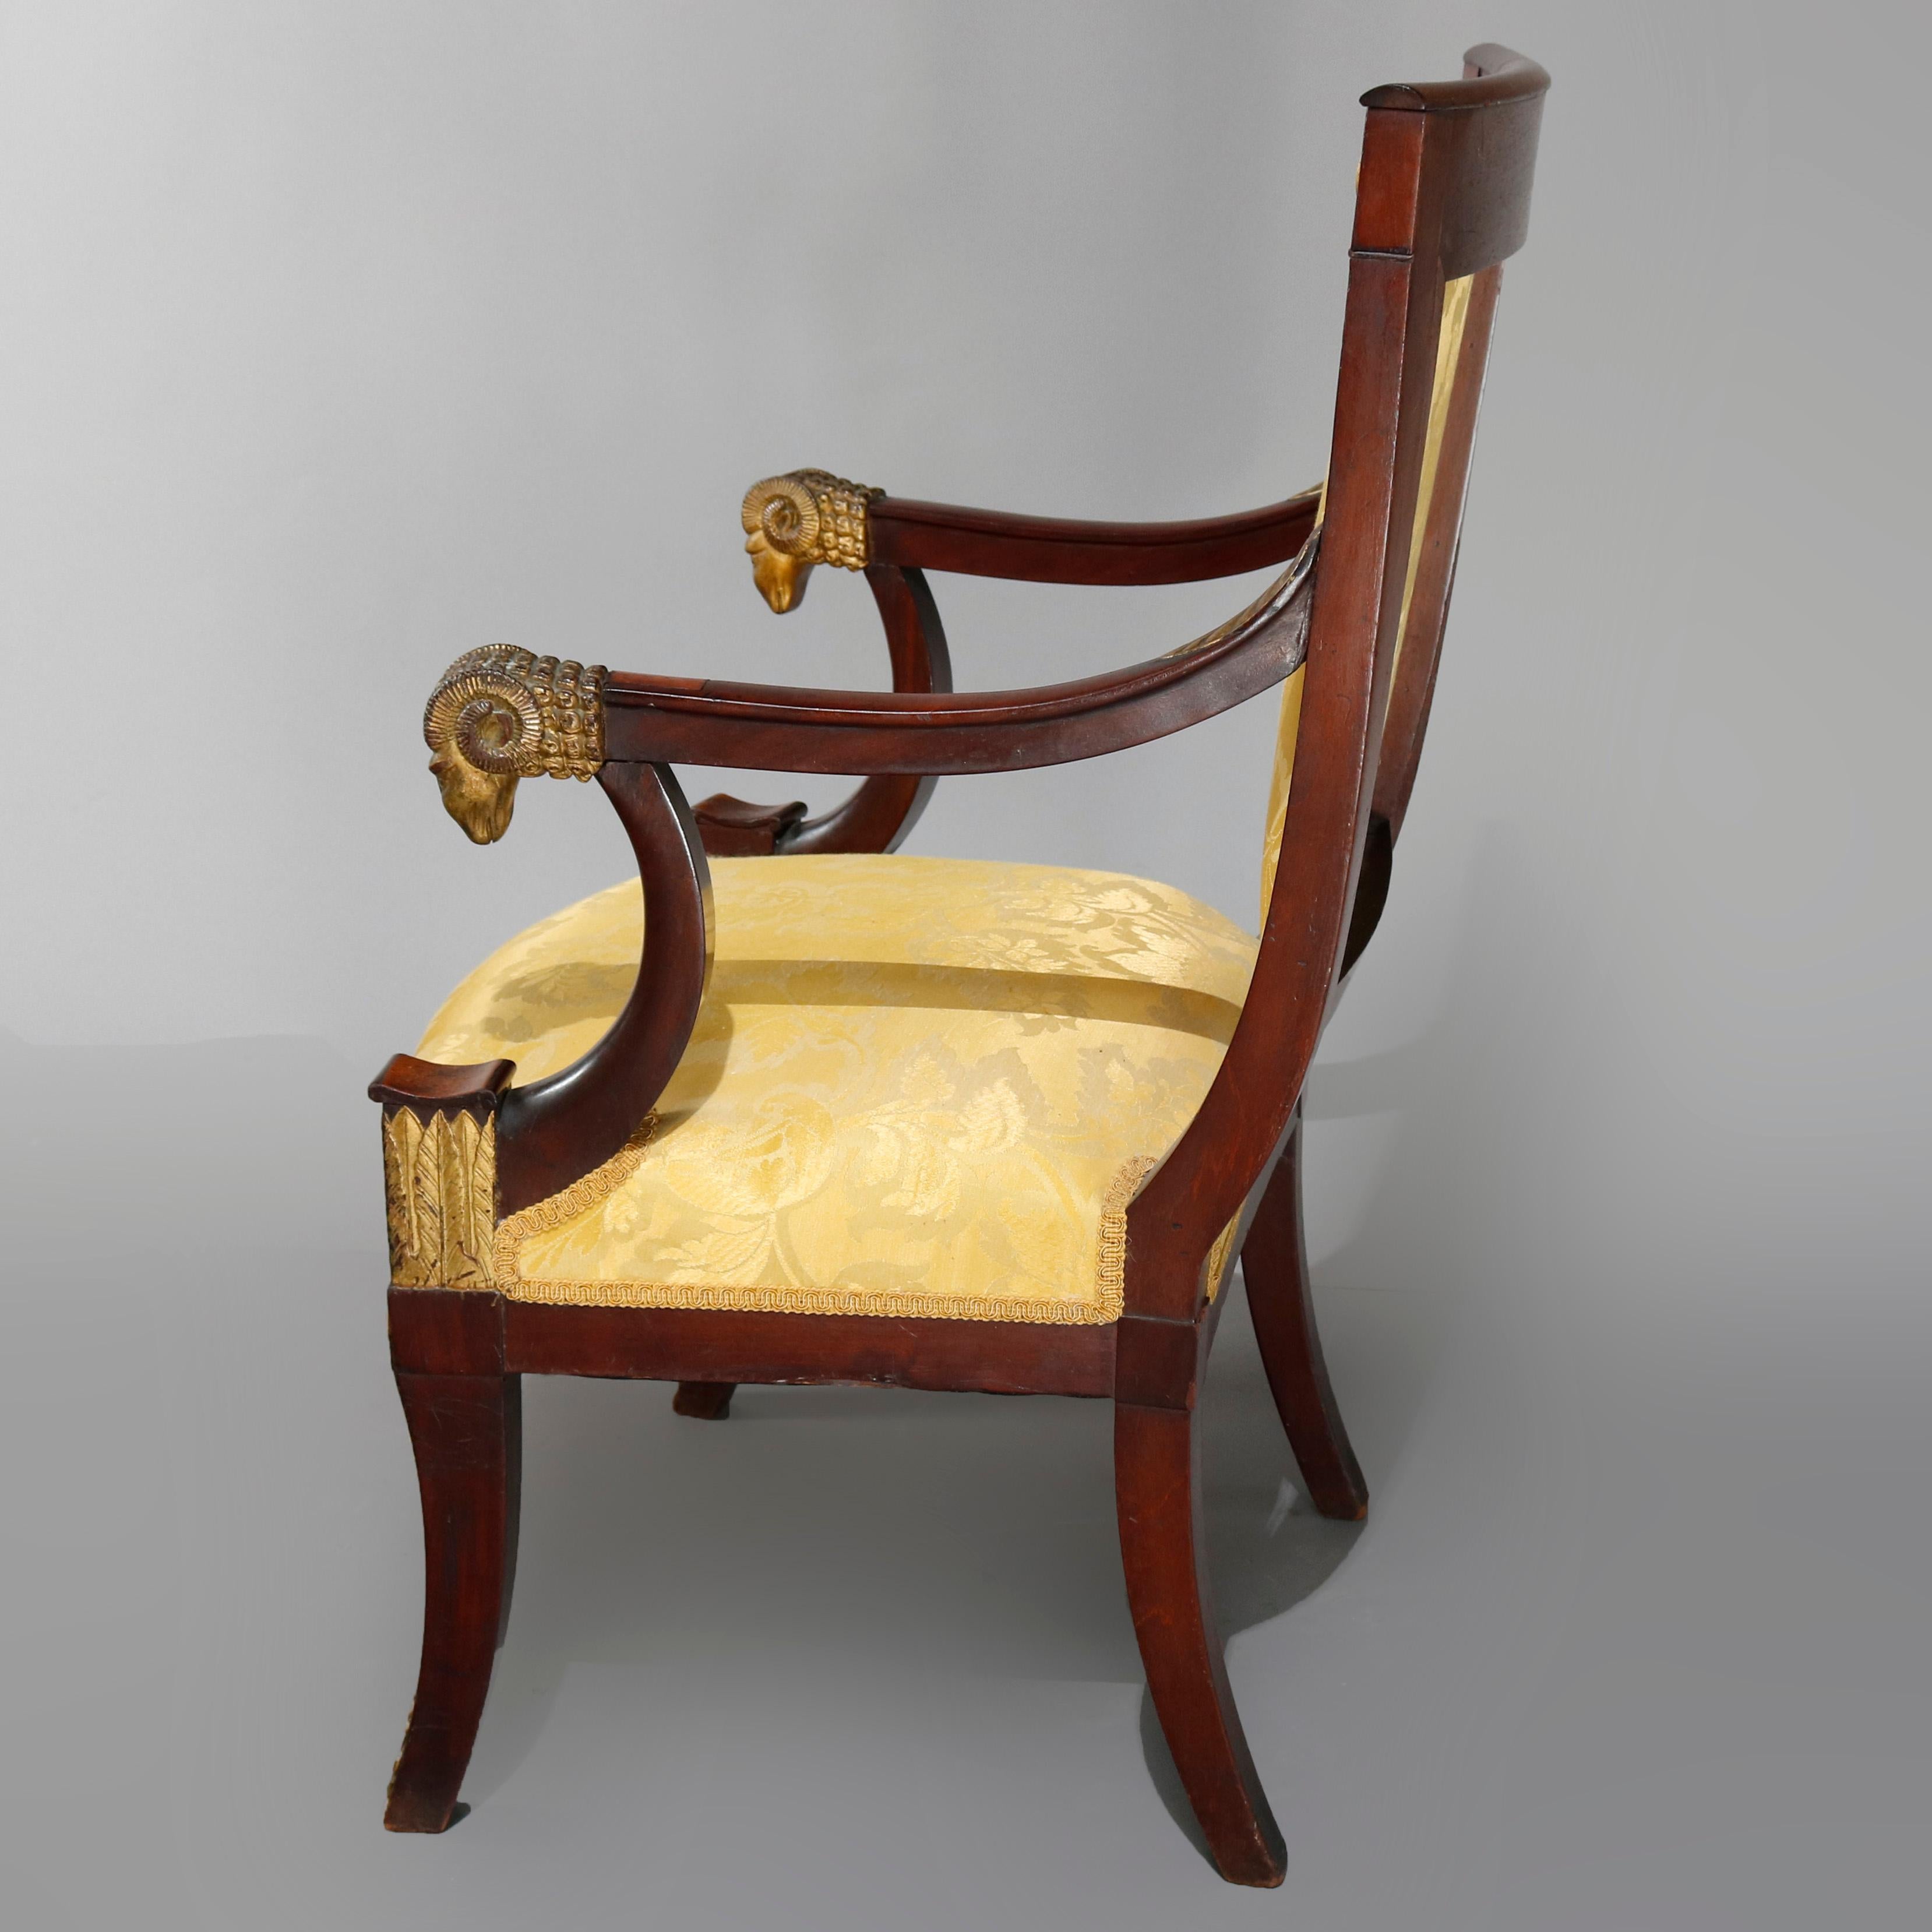 An antique early 19th century French First Empire upholstered throne chair offers mahogany frame with ormolu accoutrements including scroll, foliate and dragon crest, figural ram's head arms, Egyption reed, acanthus and palmette, circa